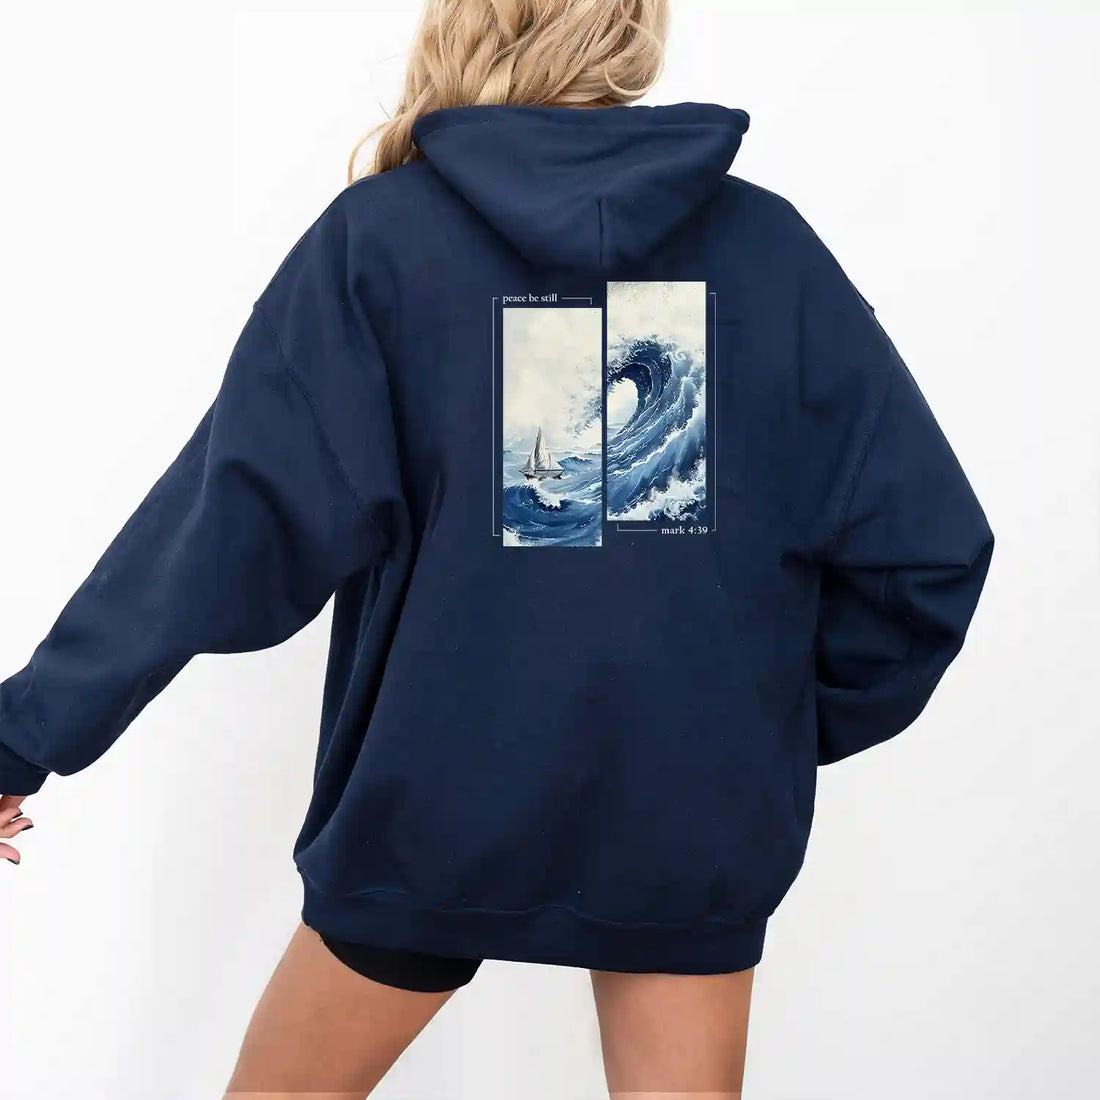 The Be Still and Know Peace Be Still hoodie.